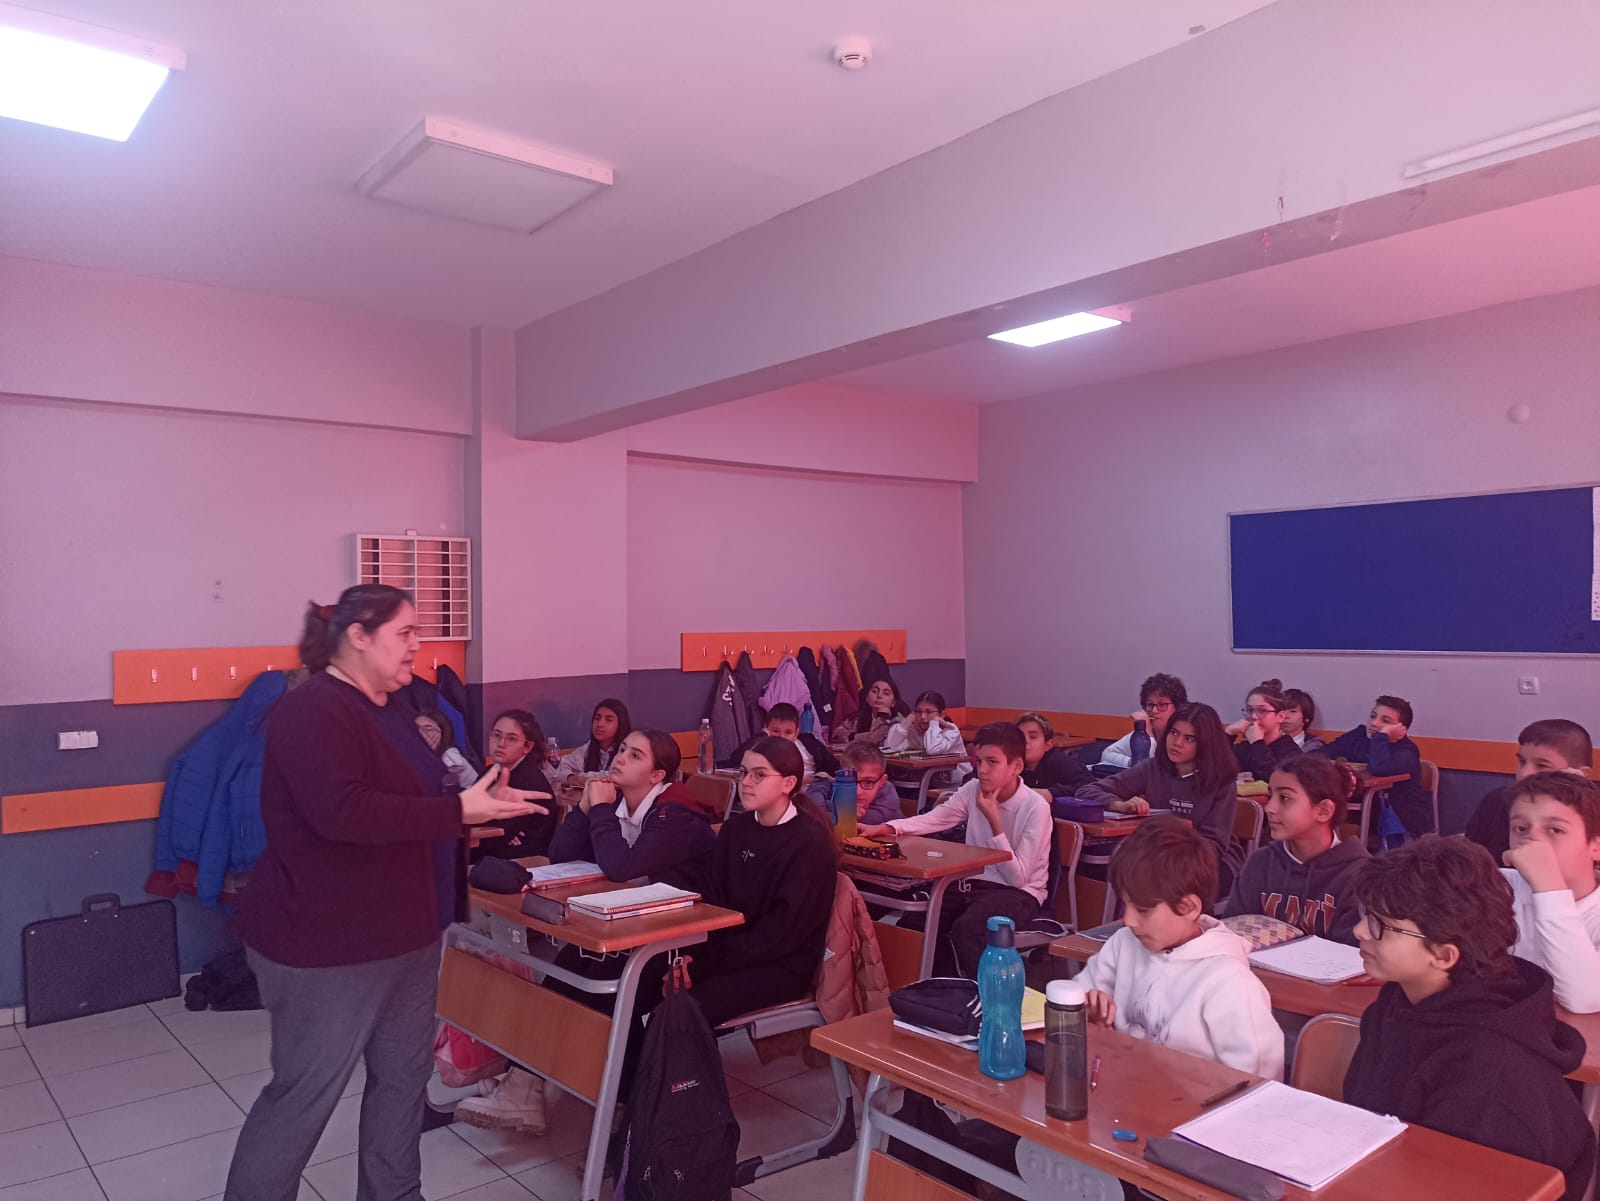 A Turkish lecture about healthy habits